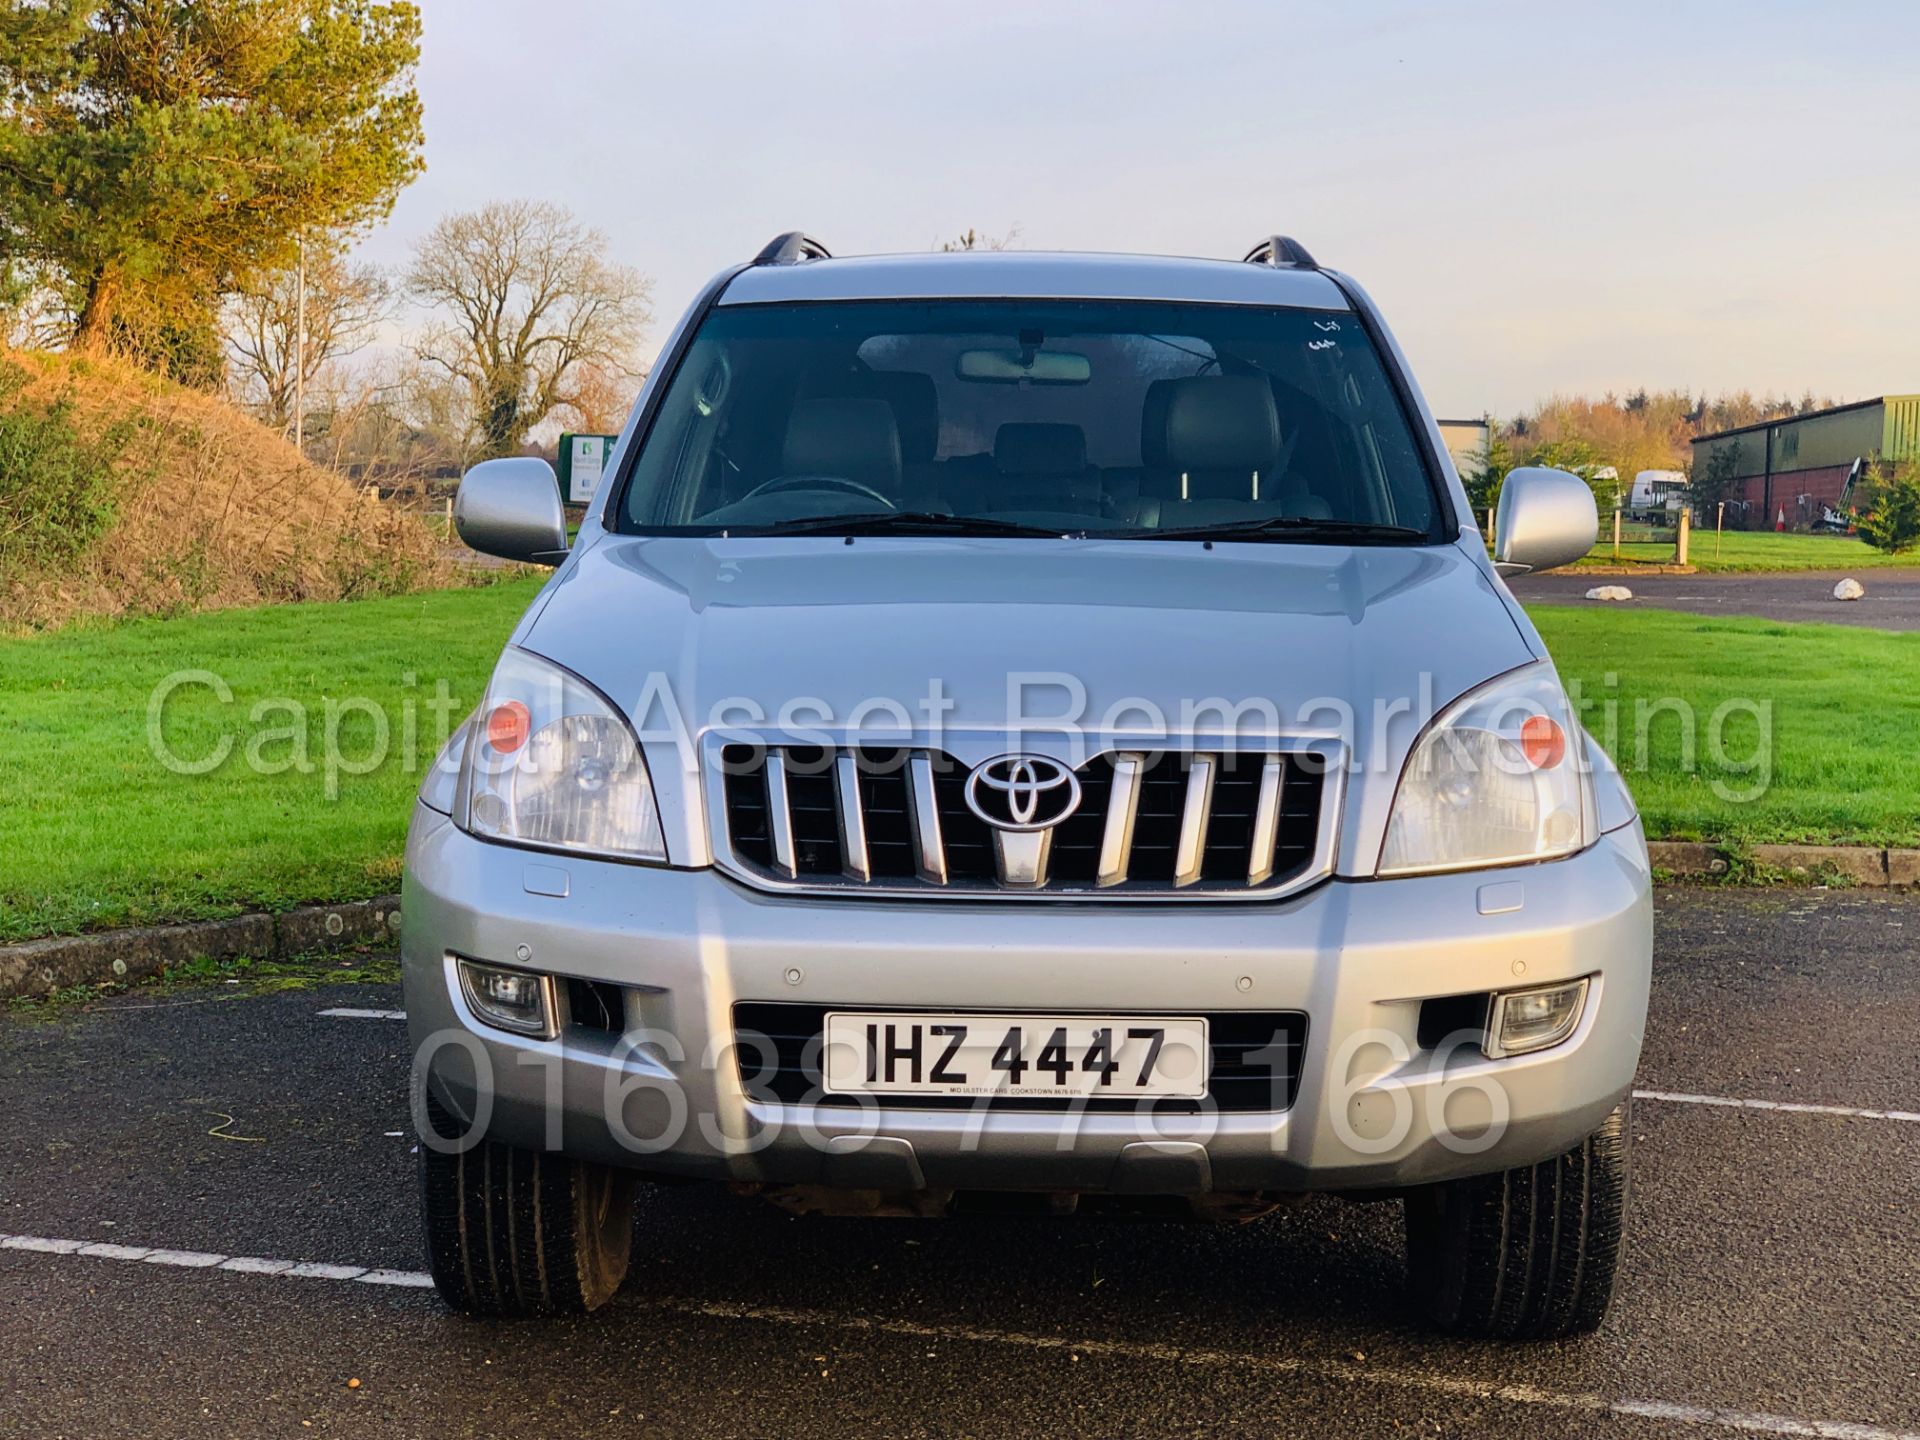 (On Sale) TOYOTA LAND CRUISER *INVINCIBLE* 7 SEATER SUV (2006) '3.0 D-4D - AUTO' *TOP SPEC* (NO VAT) - Image 4 of 50